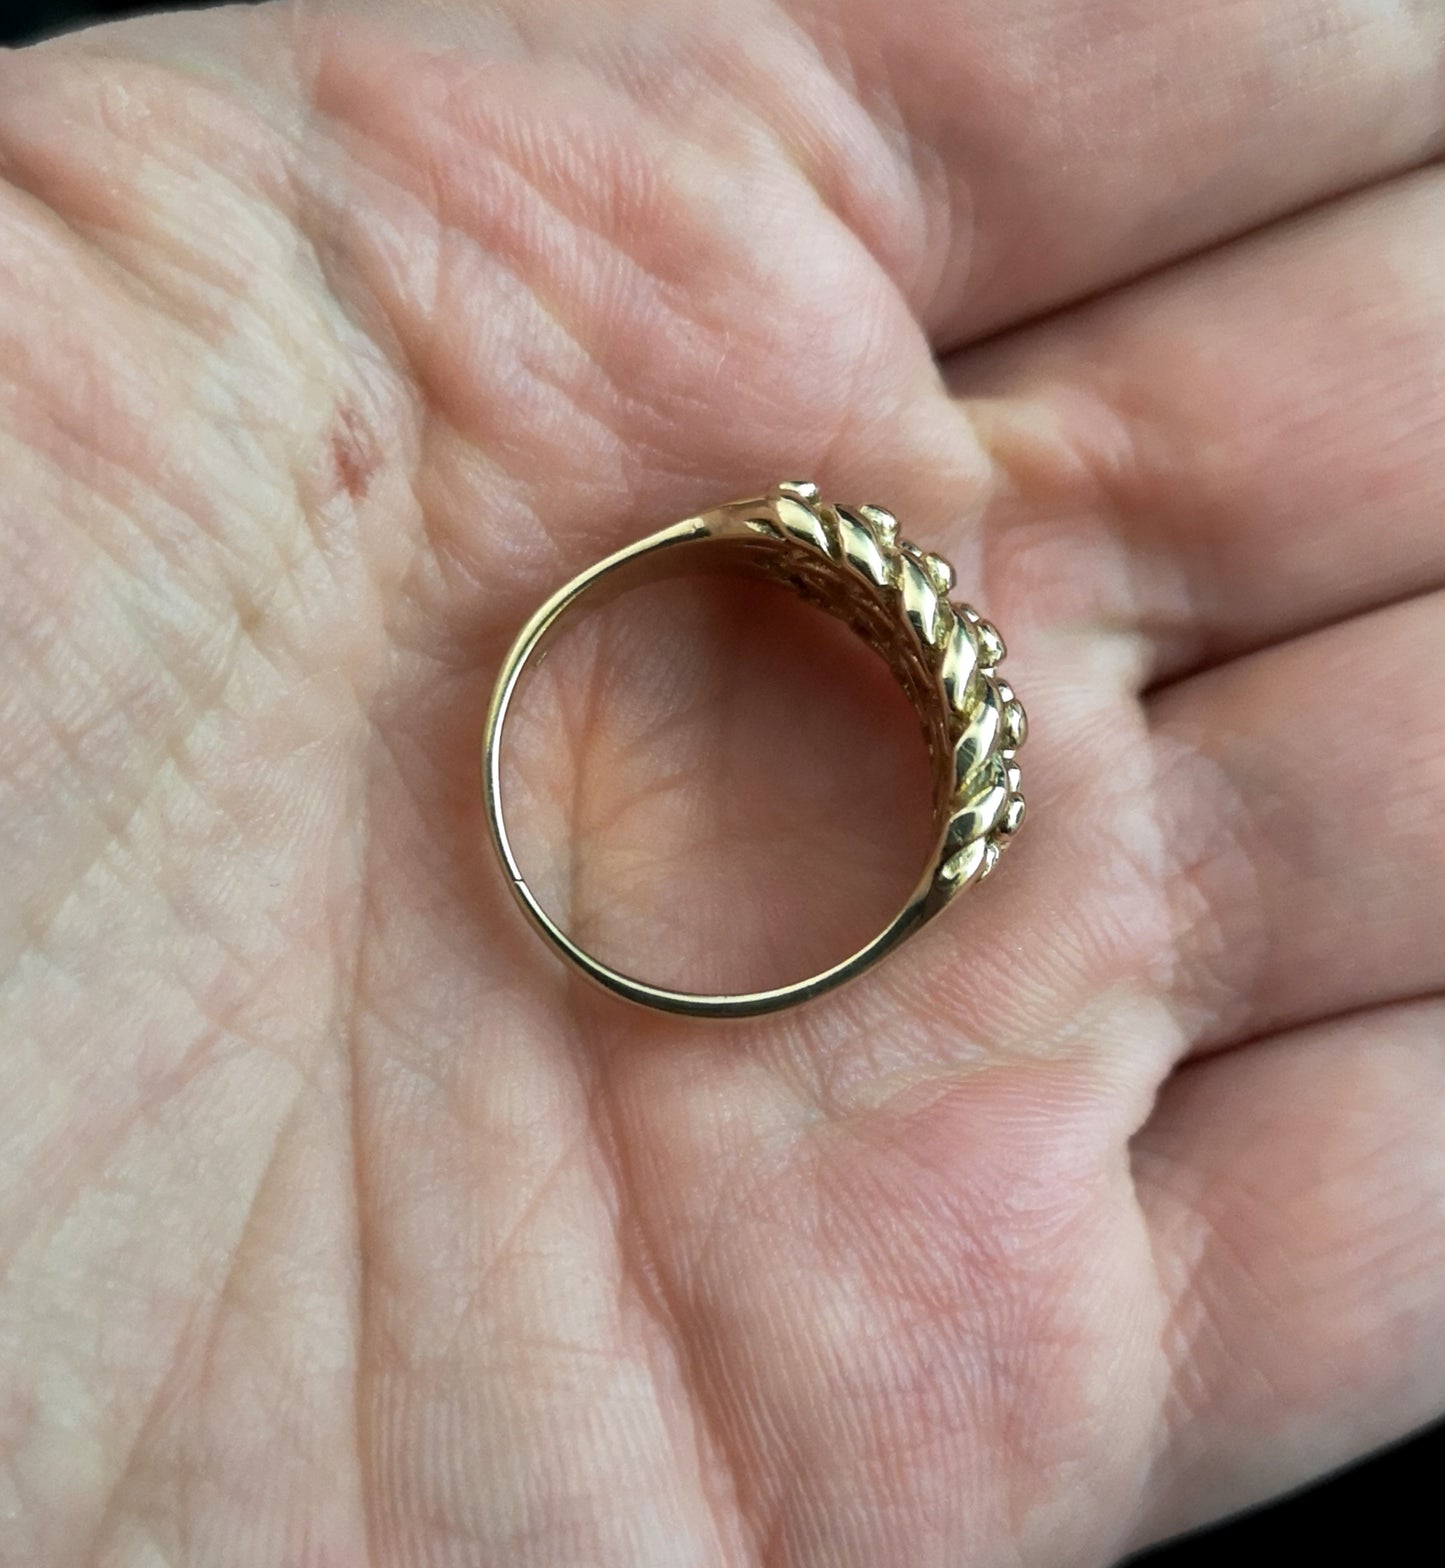 Antique 9ct gold keeper ring, heavy, Edwardian